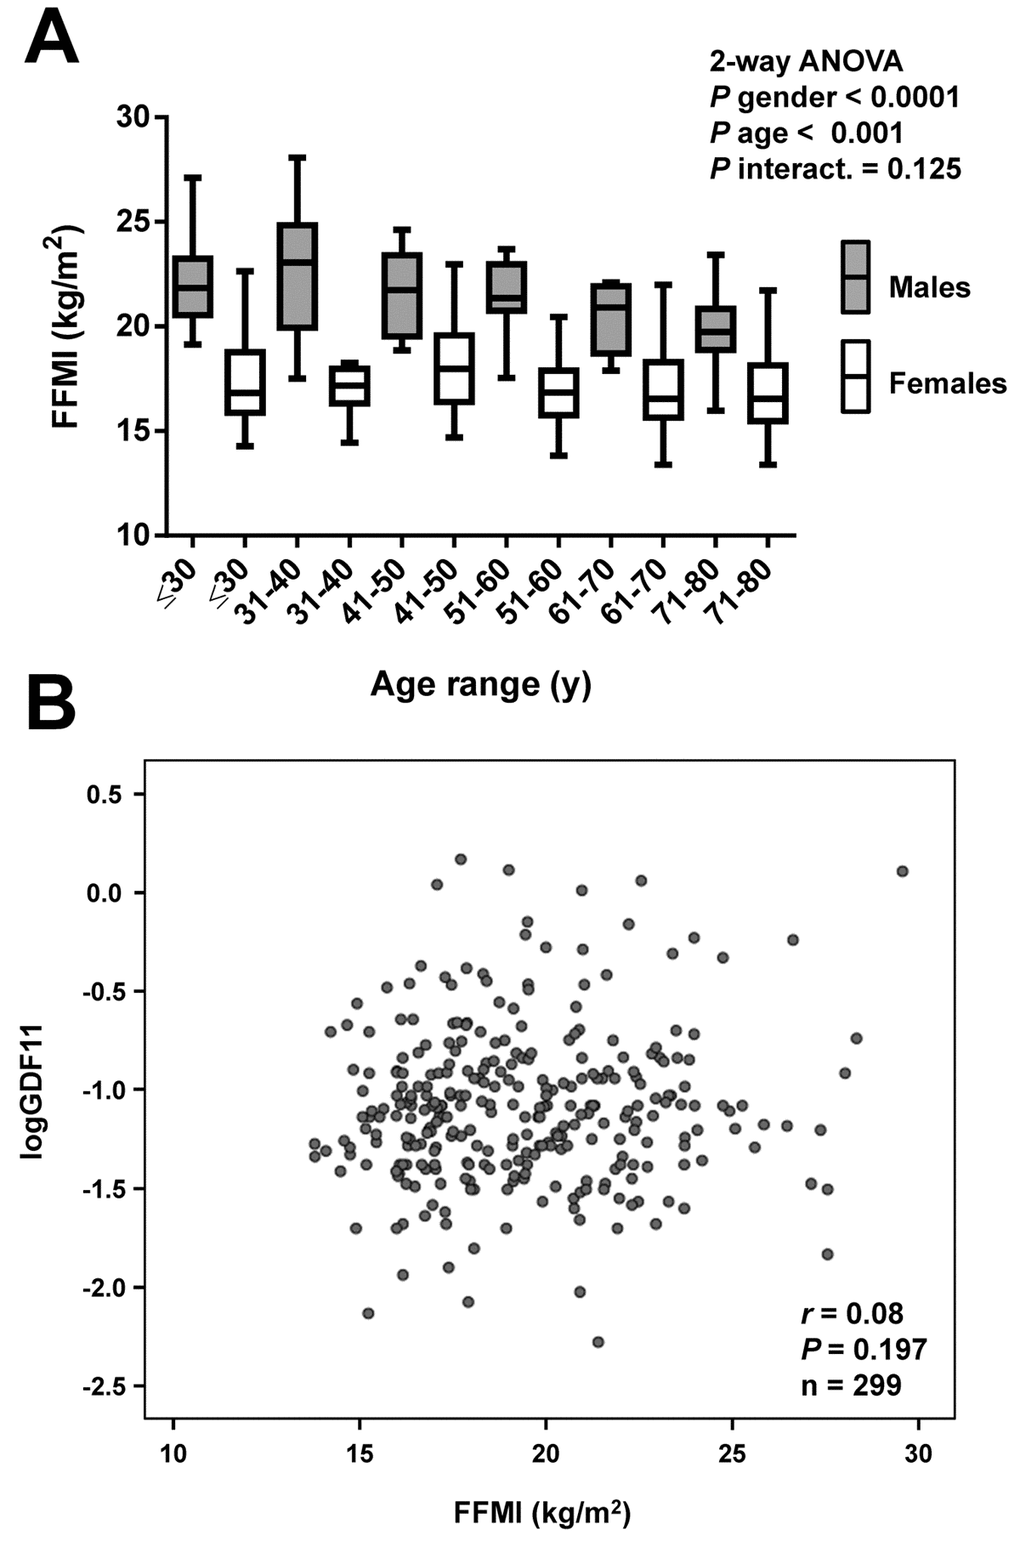 Correlation of GDF11 levels with FFMI. (A) Comparison of fat-free mass index (FFMI) in the whole sample aged between 18 and 79 y segregated by gender (males in grey and females in white) and decades (≤30 y, males n=18, females n=31), (31-40 y, males n=20, females n=34), (41-50 y, males n=24, females n=27), (51-60 y, males n=21, females n=33), (61-70 y, males n=14, females n=35), (71-80 y, males n=20, females n=22). Box represents interquartile range and median inside, with whiskers plotted according to the Tukey method. Statistical differences between groups were analyzed by two-way ANOVA. (B) Scatter diagram showing the relationship between circulating concentrations of GDF11 and FFMI. Pearson’s correlation coefficient and P value are indicated.